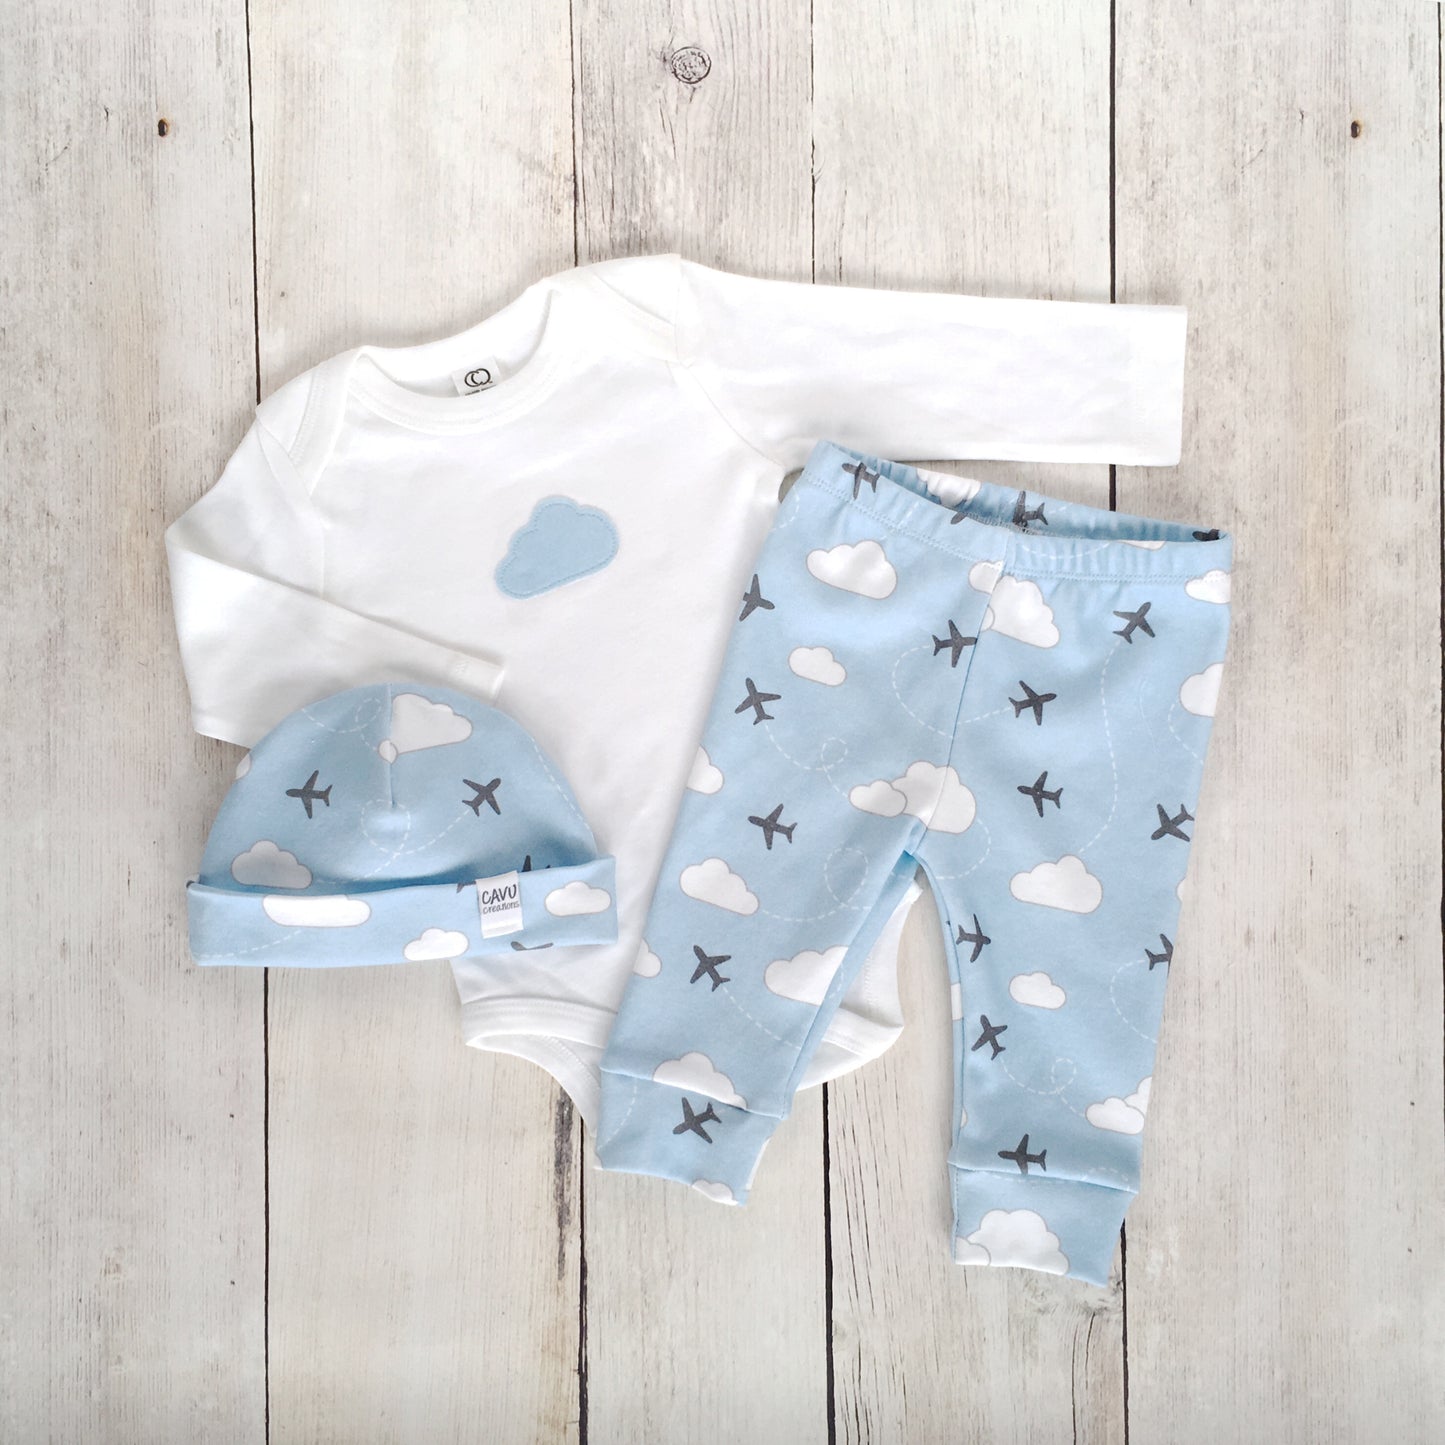 Jets in Clouds Organic Baby Leggings - Gray / White / Sky Blue - CAVU Creations